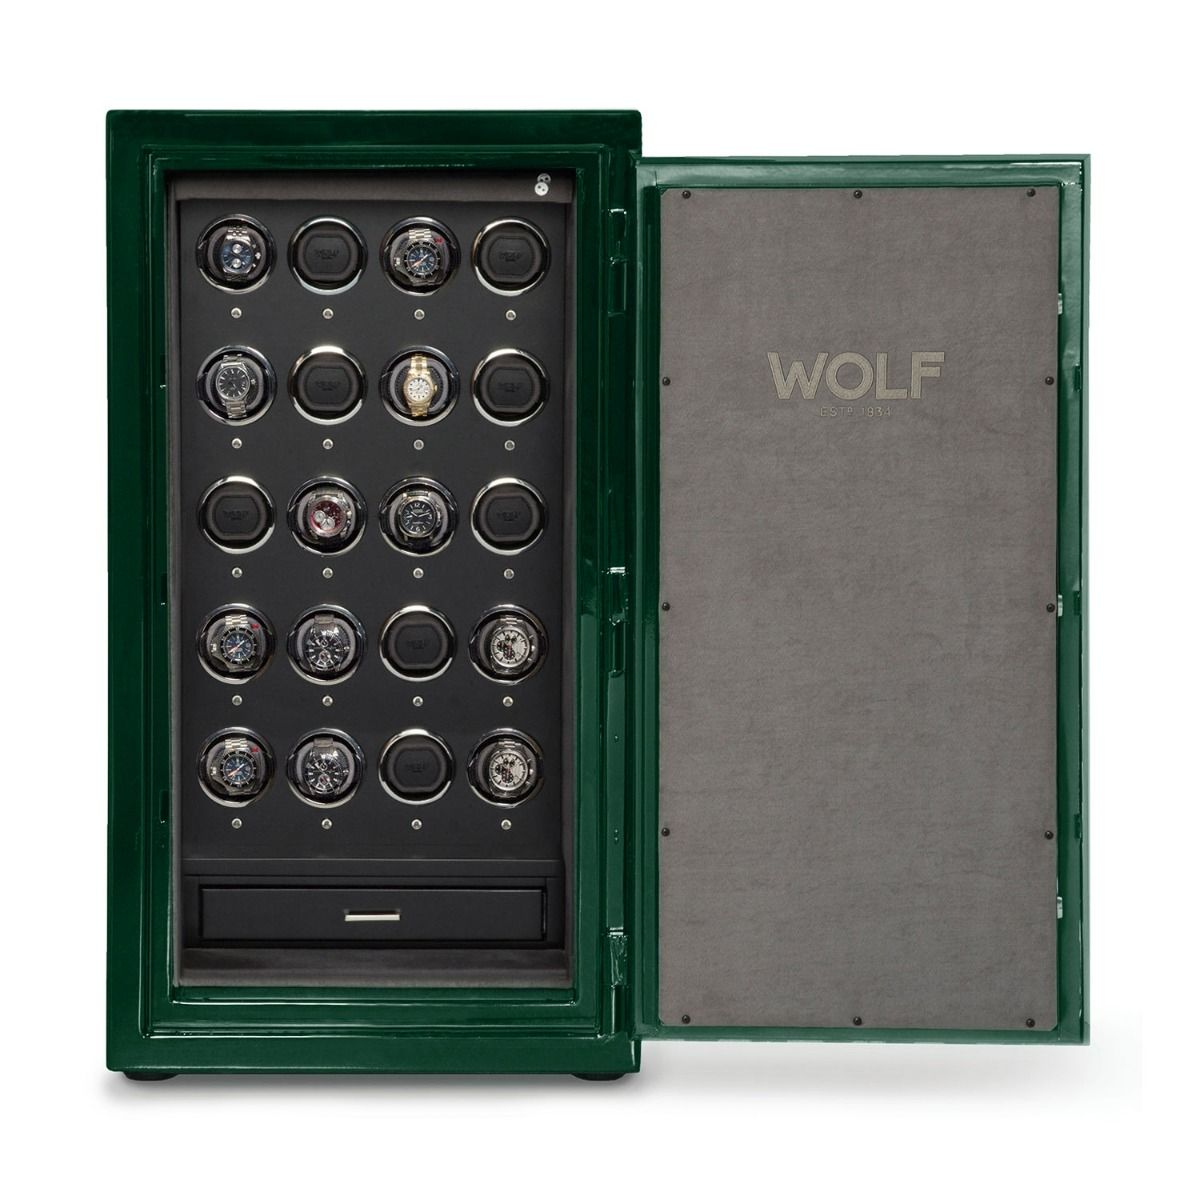 WOLF adds to offering with new watch stands | Retail Jeweller